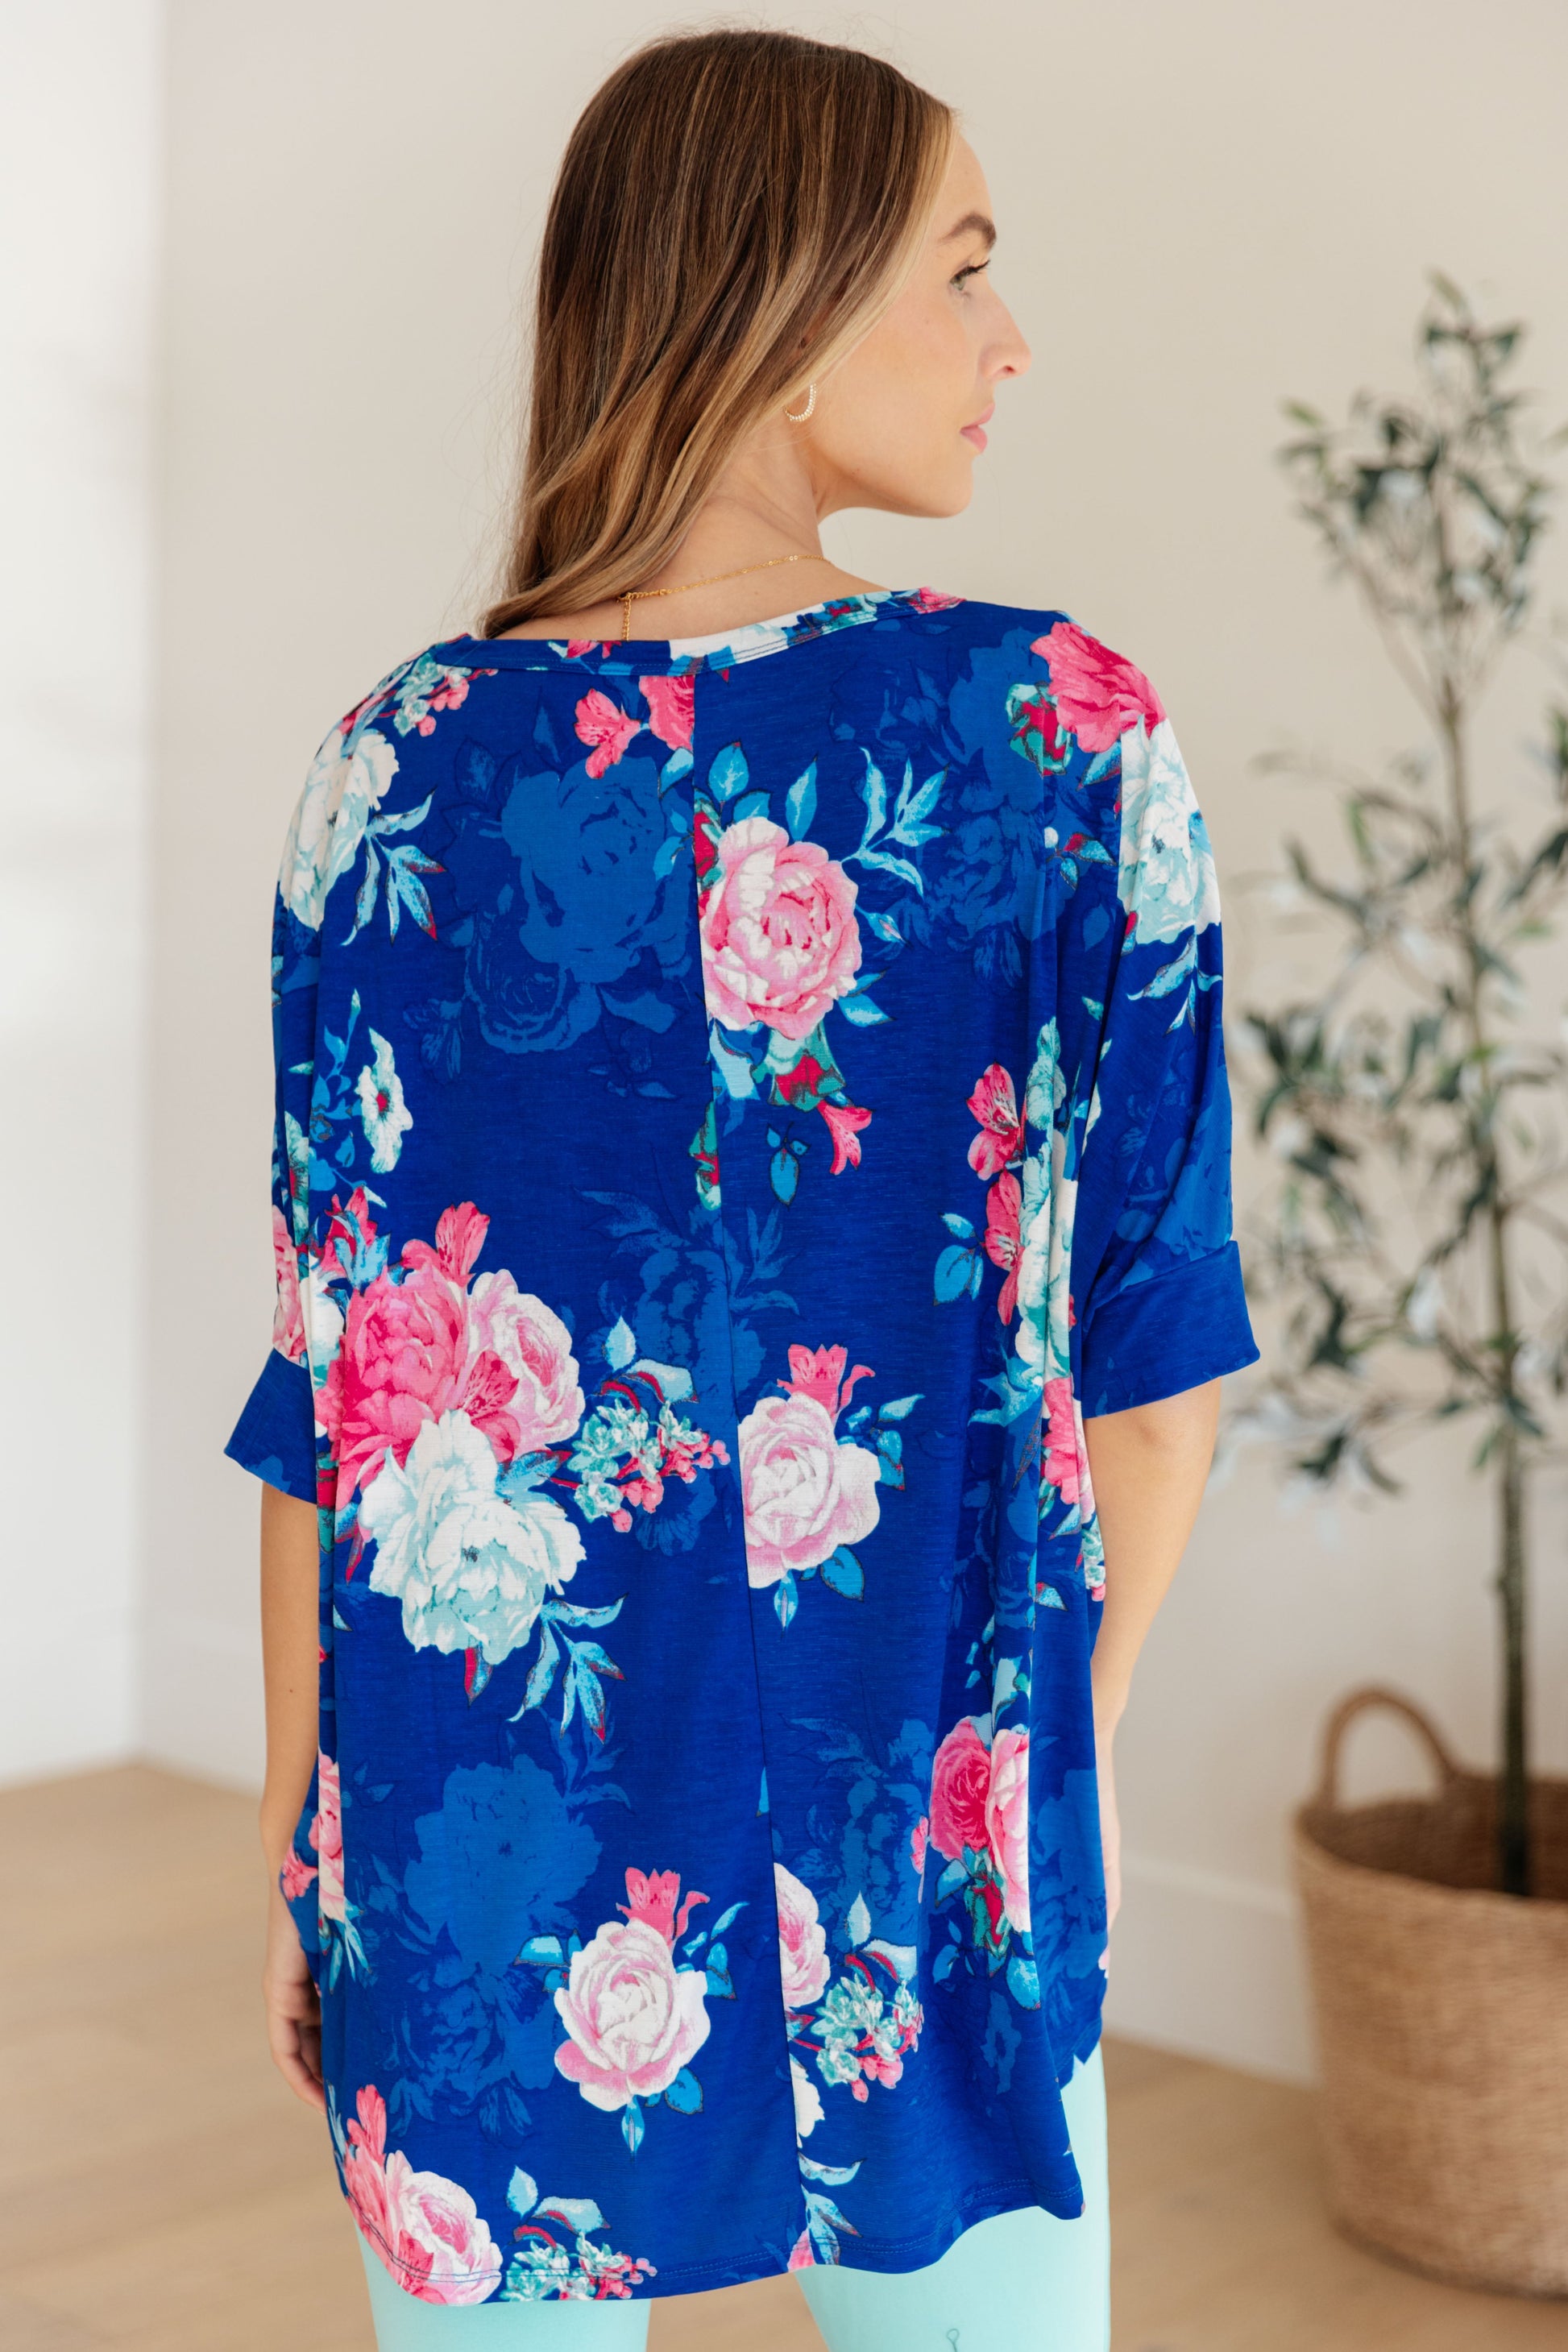 Essential Blouse in Royal and Pink Floral Ave Shops